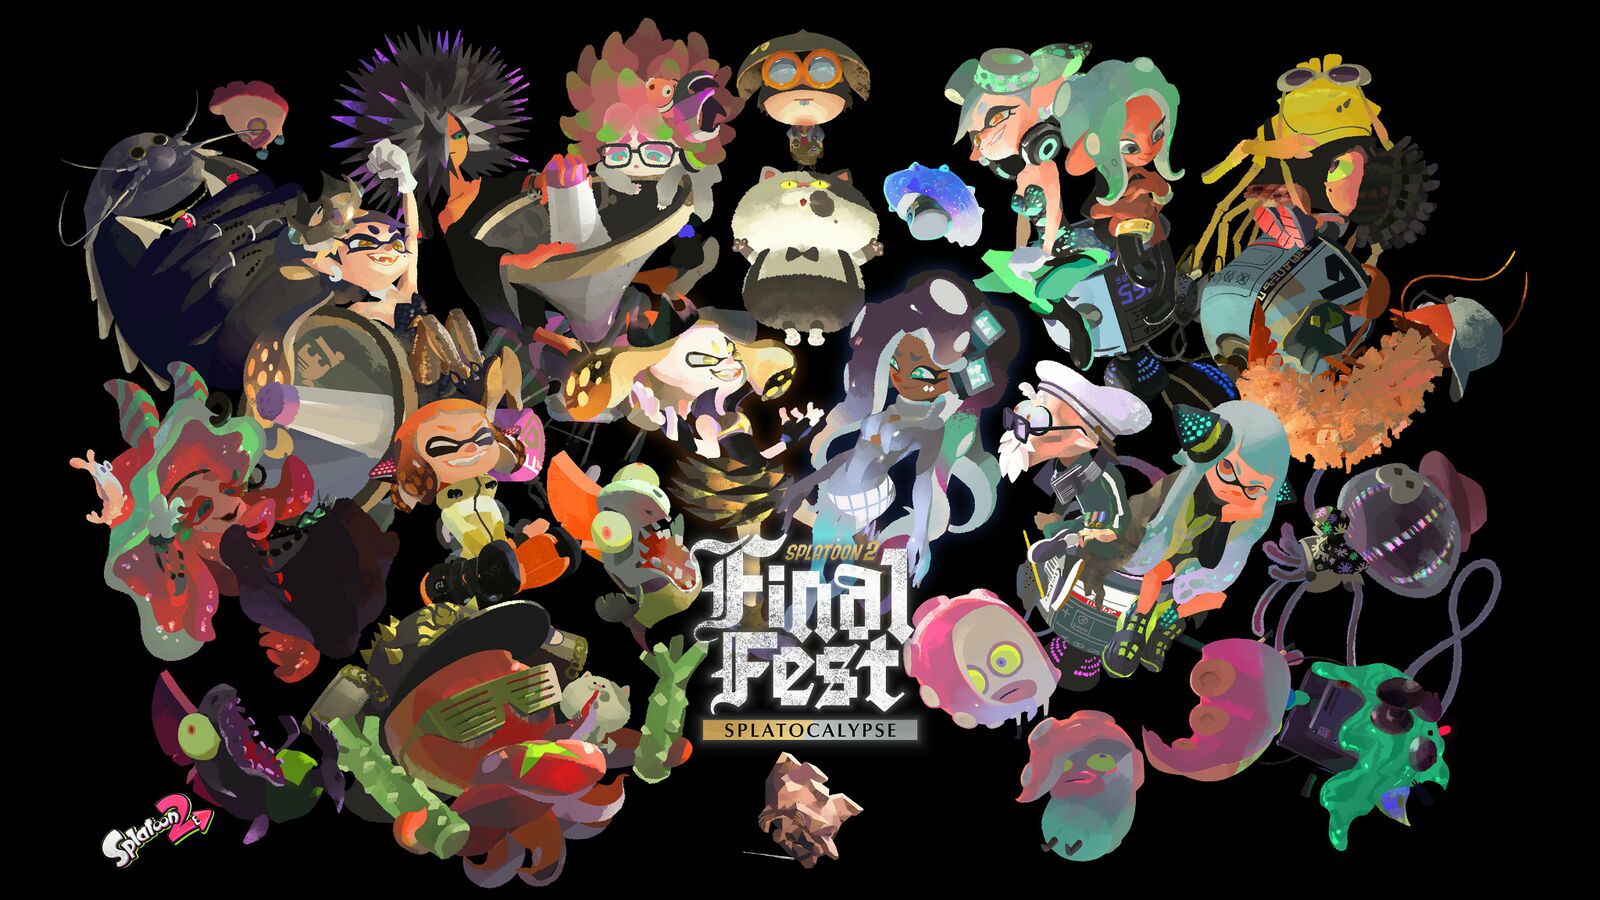 	Official promo artwork for the Final Fest (Chaos vs. Order). Callie, DJ Octavio, Pearl, Salmonids, Agent 4 and others on one side for Chaos, with Marie, Commander Tartar, Agent 3, Agent 8, Marina and others on the other side for Order. In the middle the words Final Fest: Splatocalypse are written in silvery blue and gold.